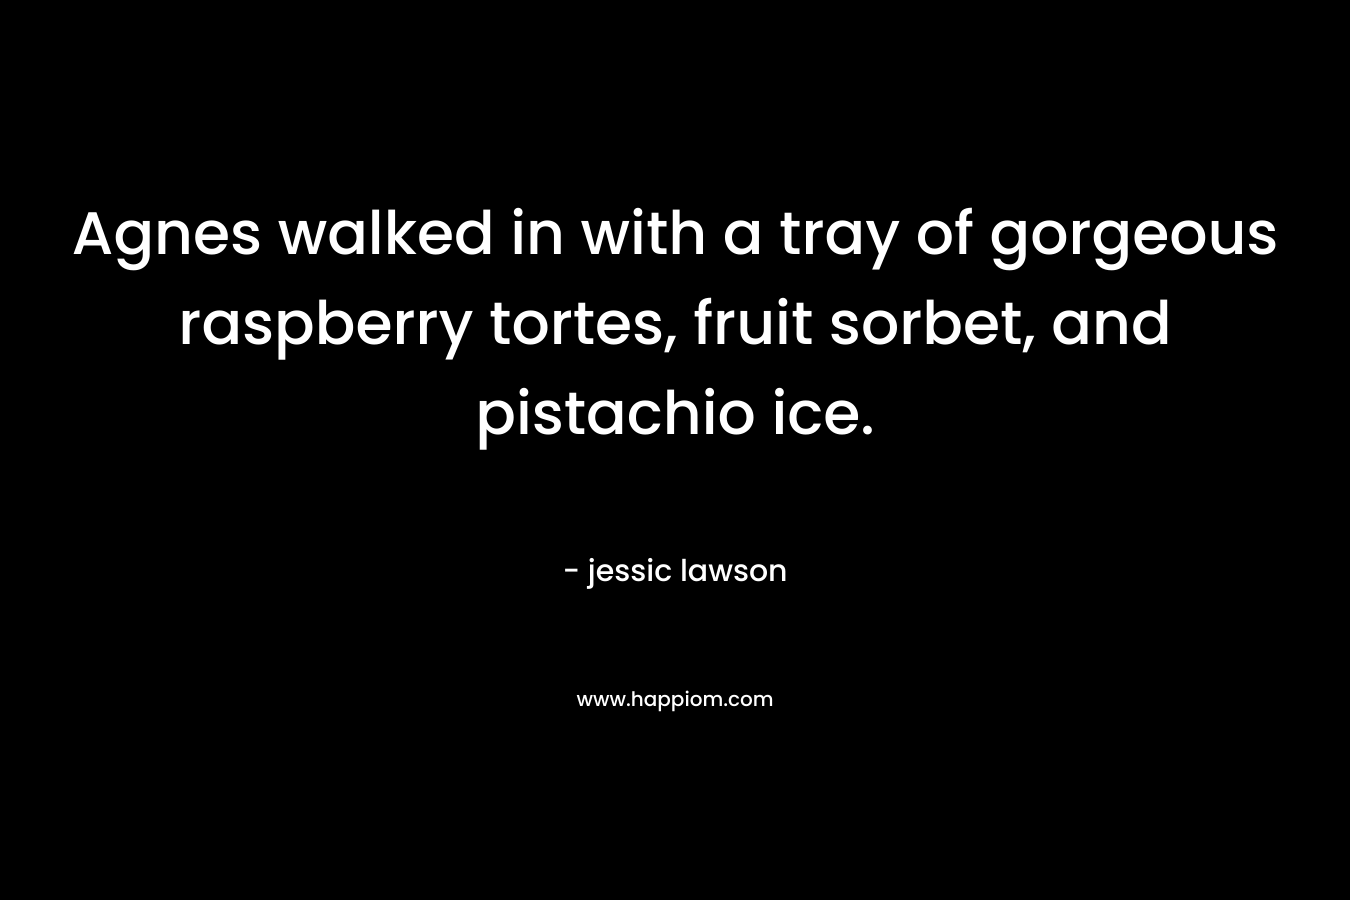 Agnes walked in with a tray of gorgeous raspberry tortes, fruit sorbet, and pistachio ice. – jessic lawson